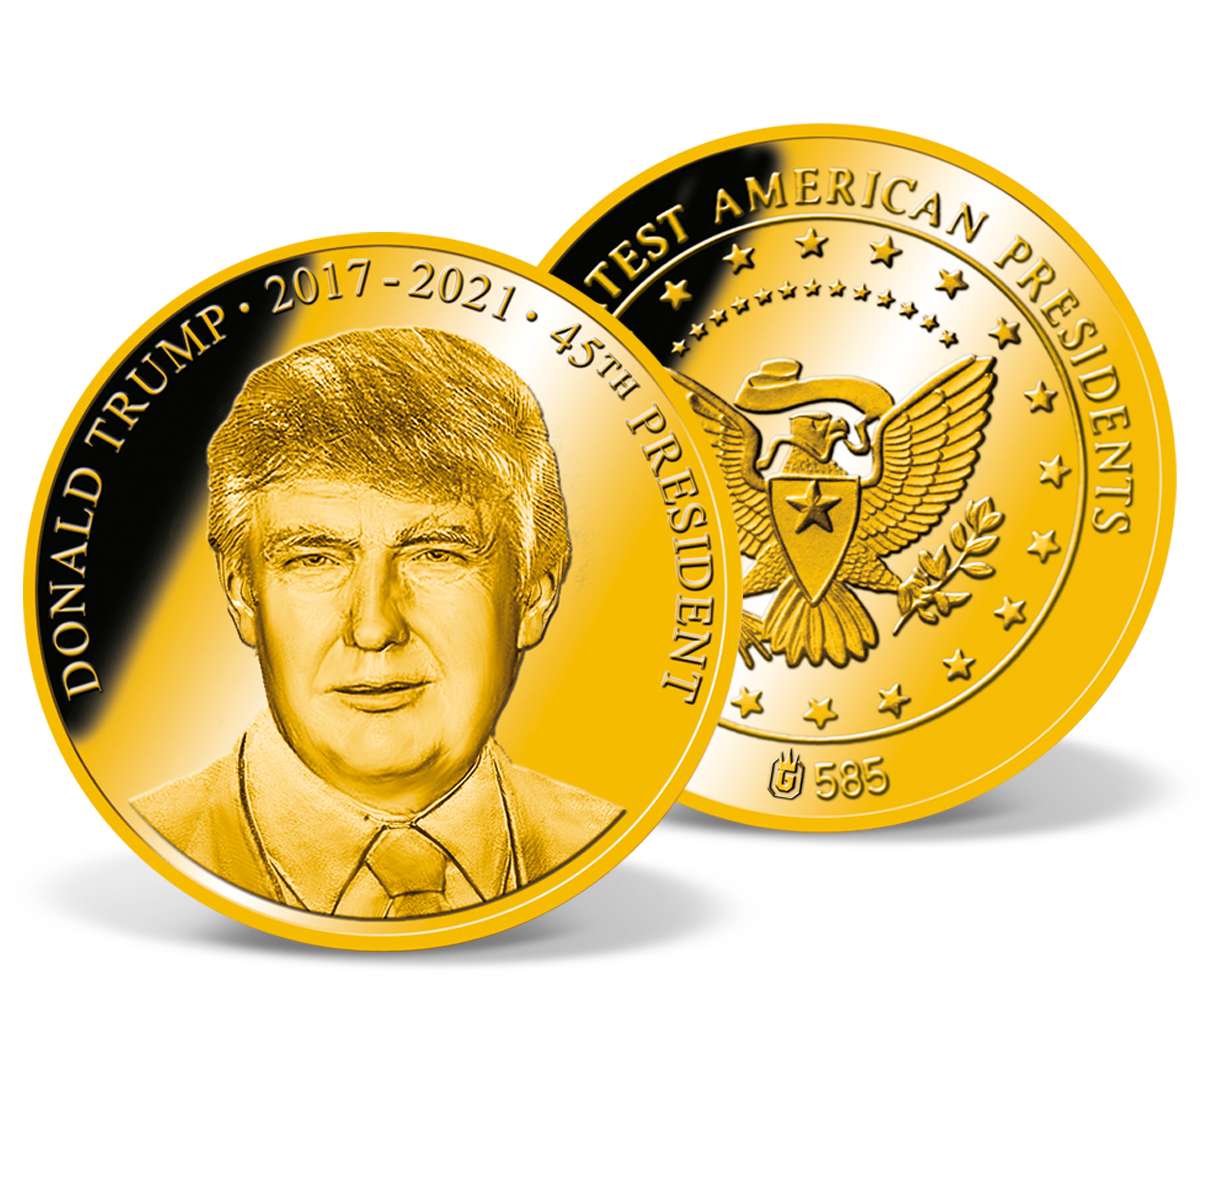 President Donald Trump Commemorative Gold Coin | Solid Gold | Gold | American Mint